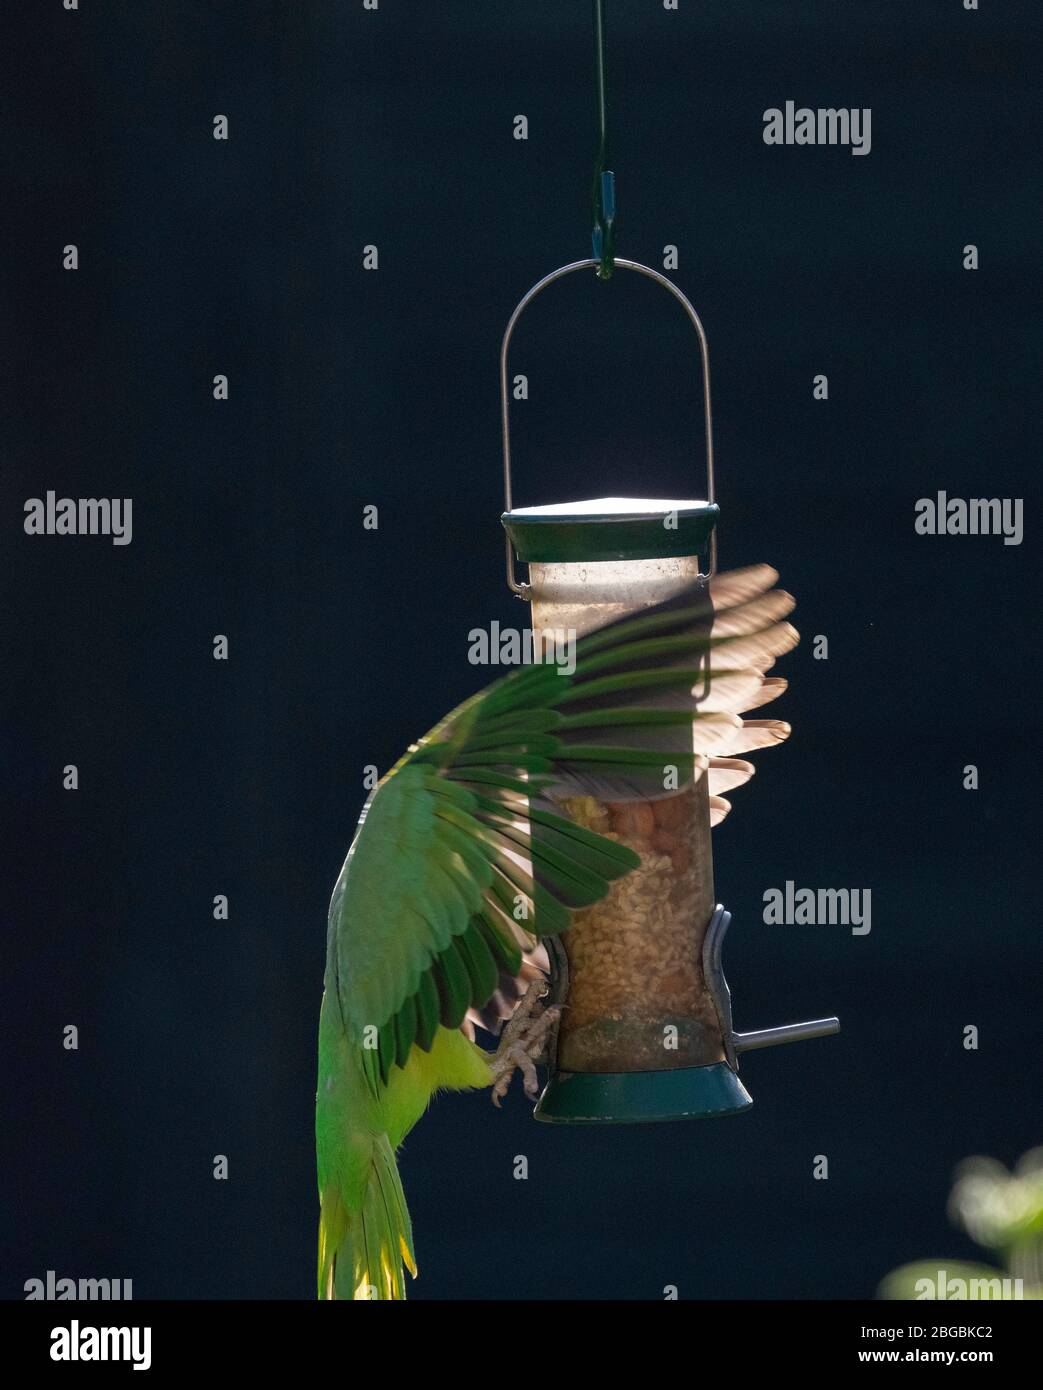 London, UK. 21st April 2020. Ring Necked Parakeet in flight lands on a garden bird feeder using its wings to grab hold. Credit: Malcolm Park/Alamy Live News. Stock Photo